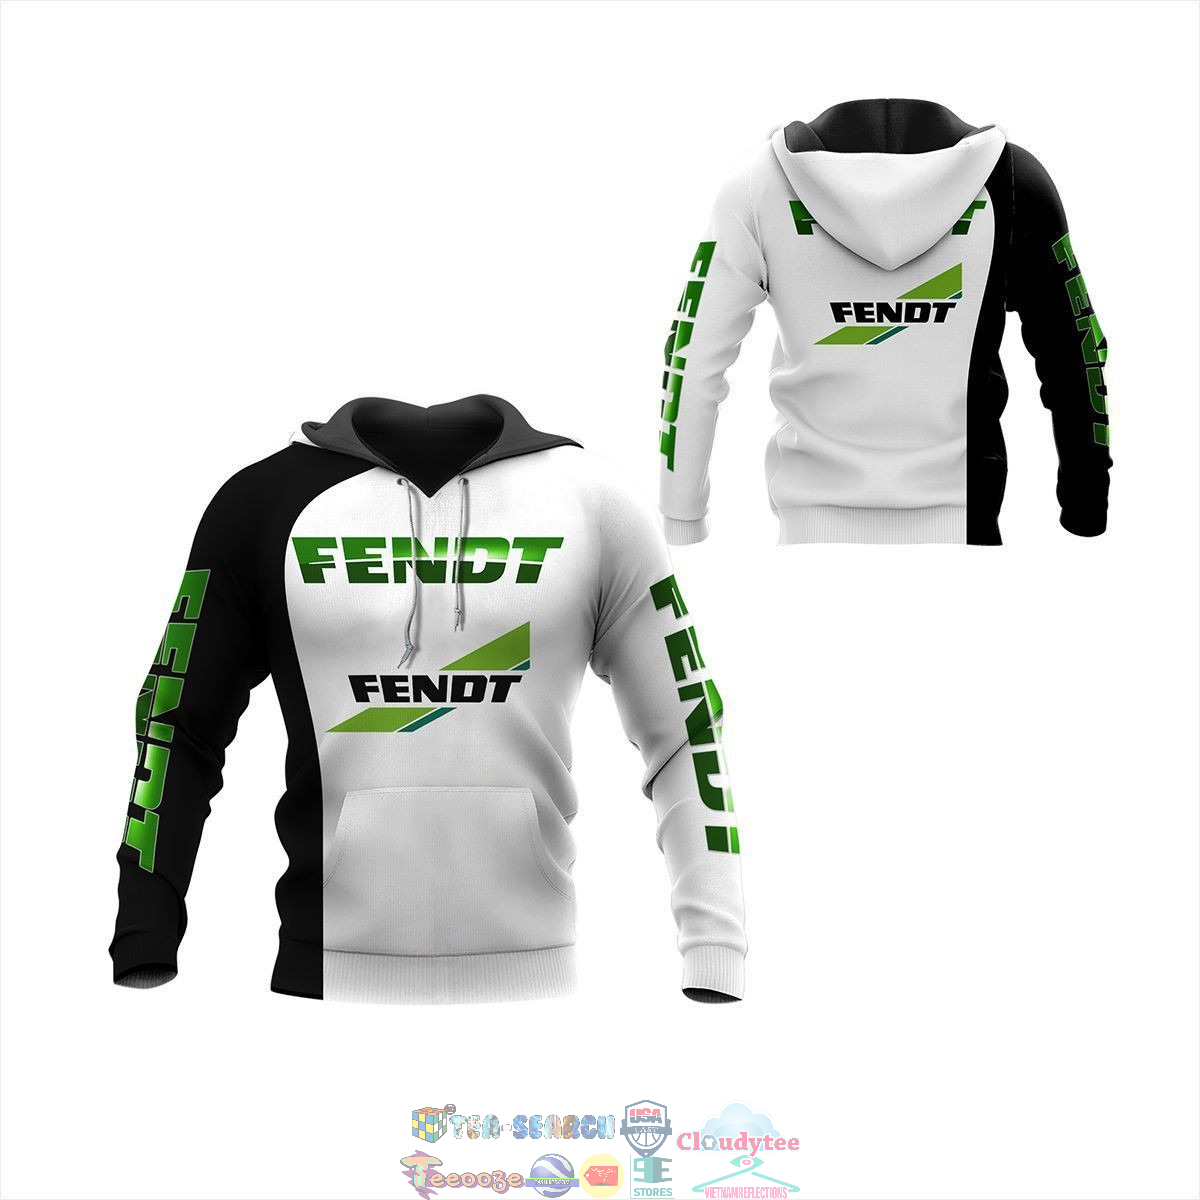 Fendt ver 2 3D hoodie and t-shirt